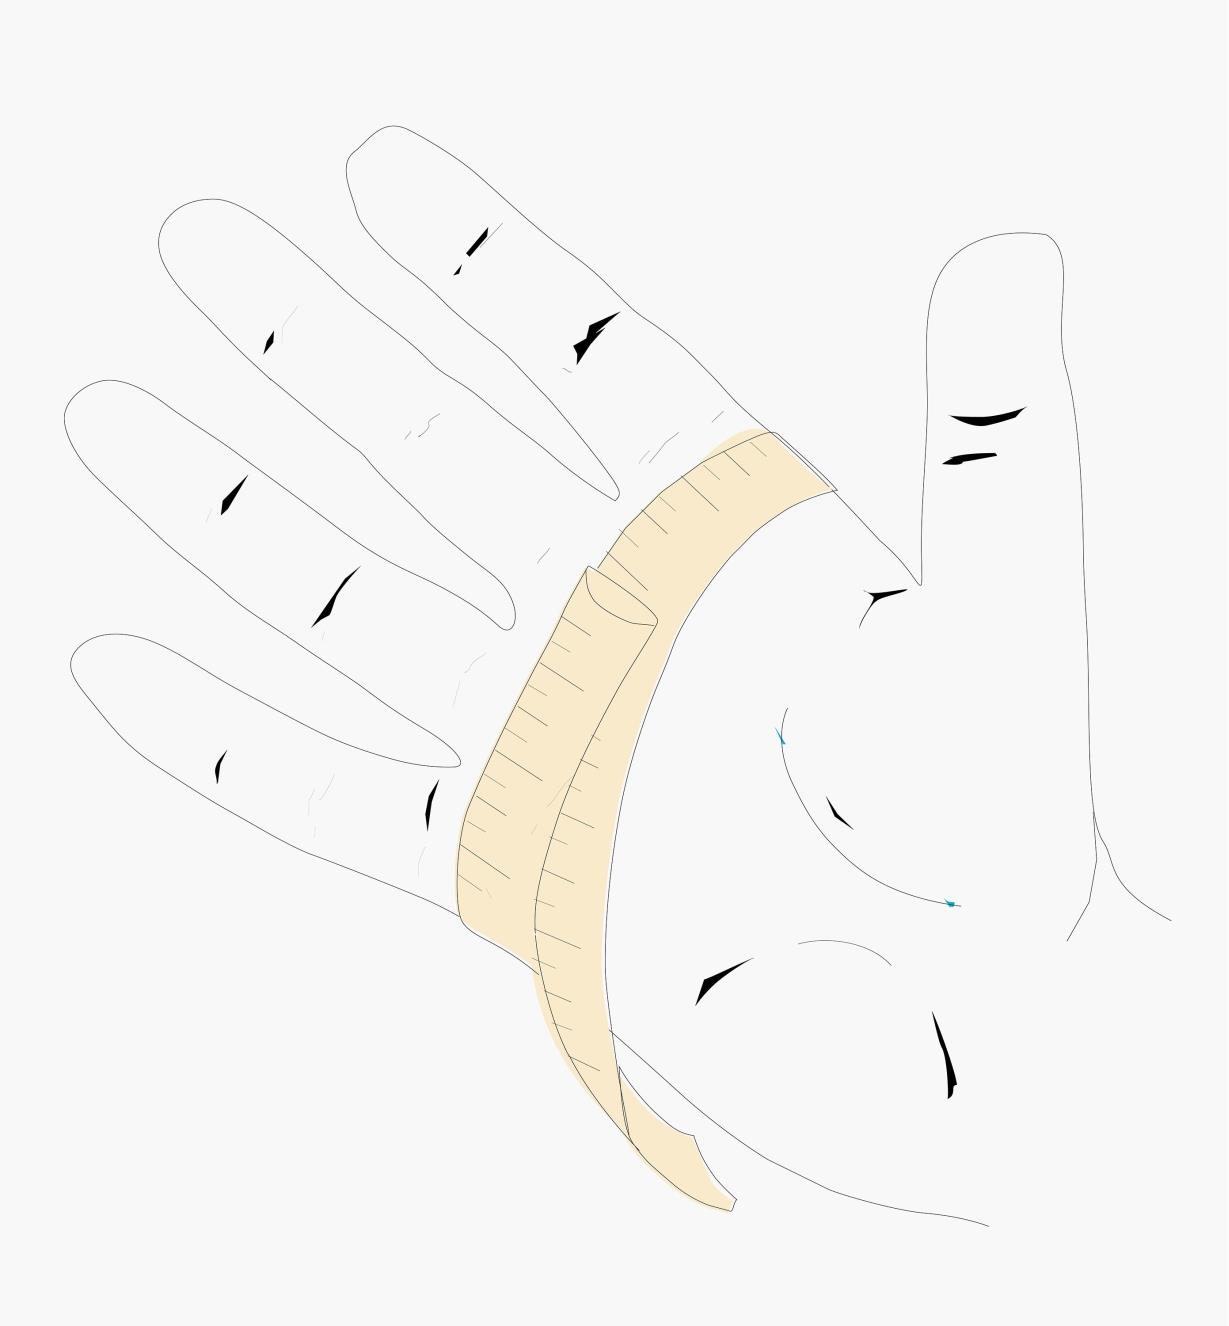 Measuring a hand to determine glove sizing